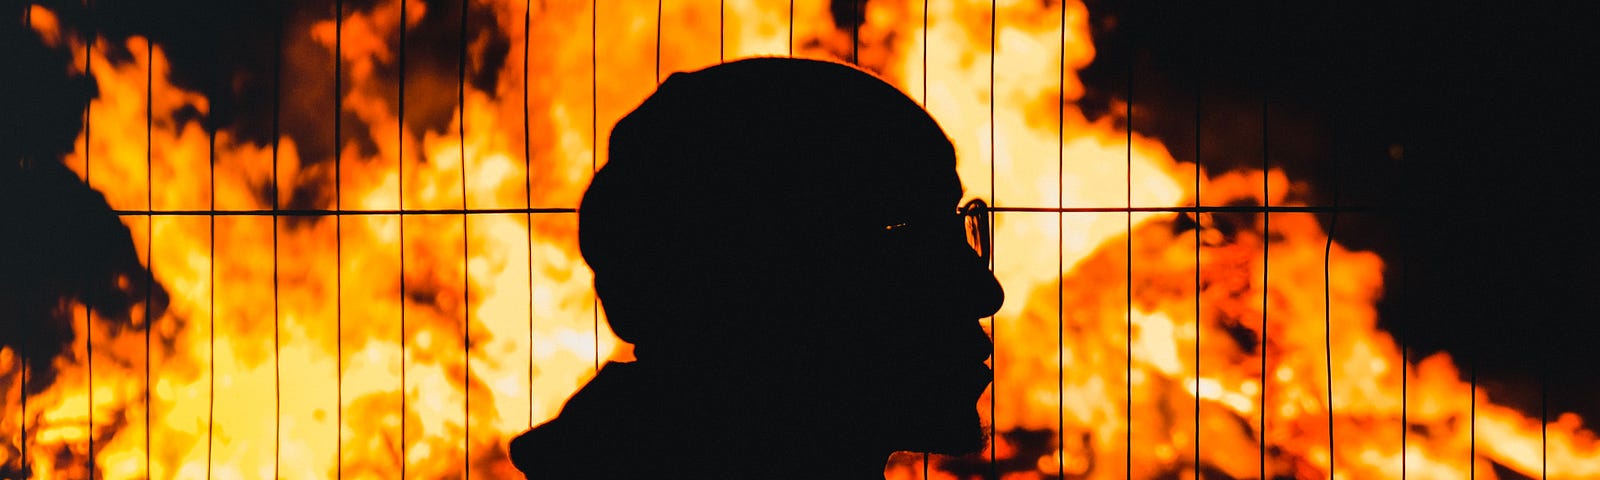 The silhouette of a bearded ethnic man in profile against a raging red burning fire behind a wired fence as if in protest.